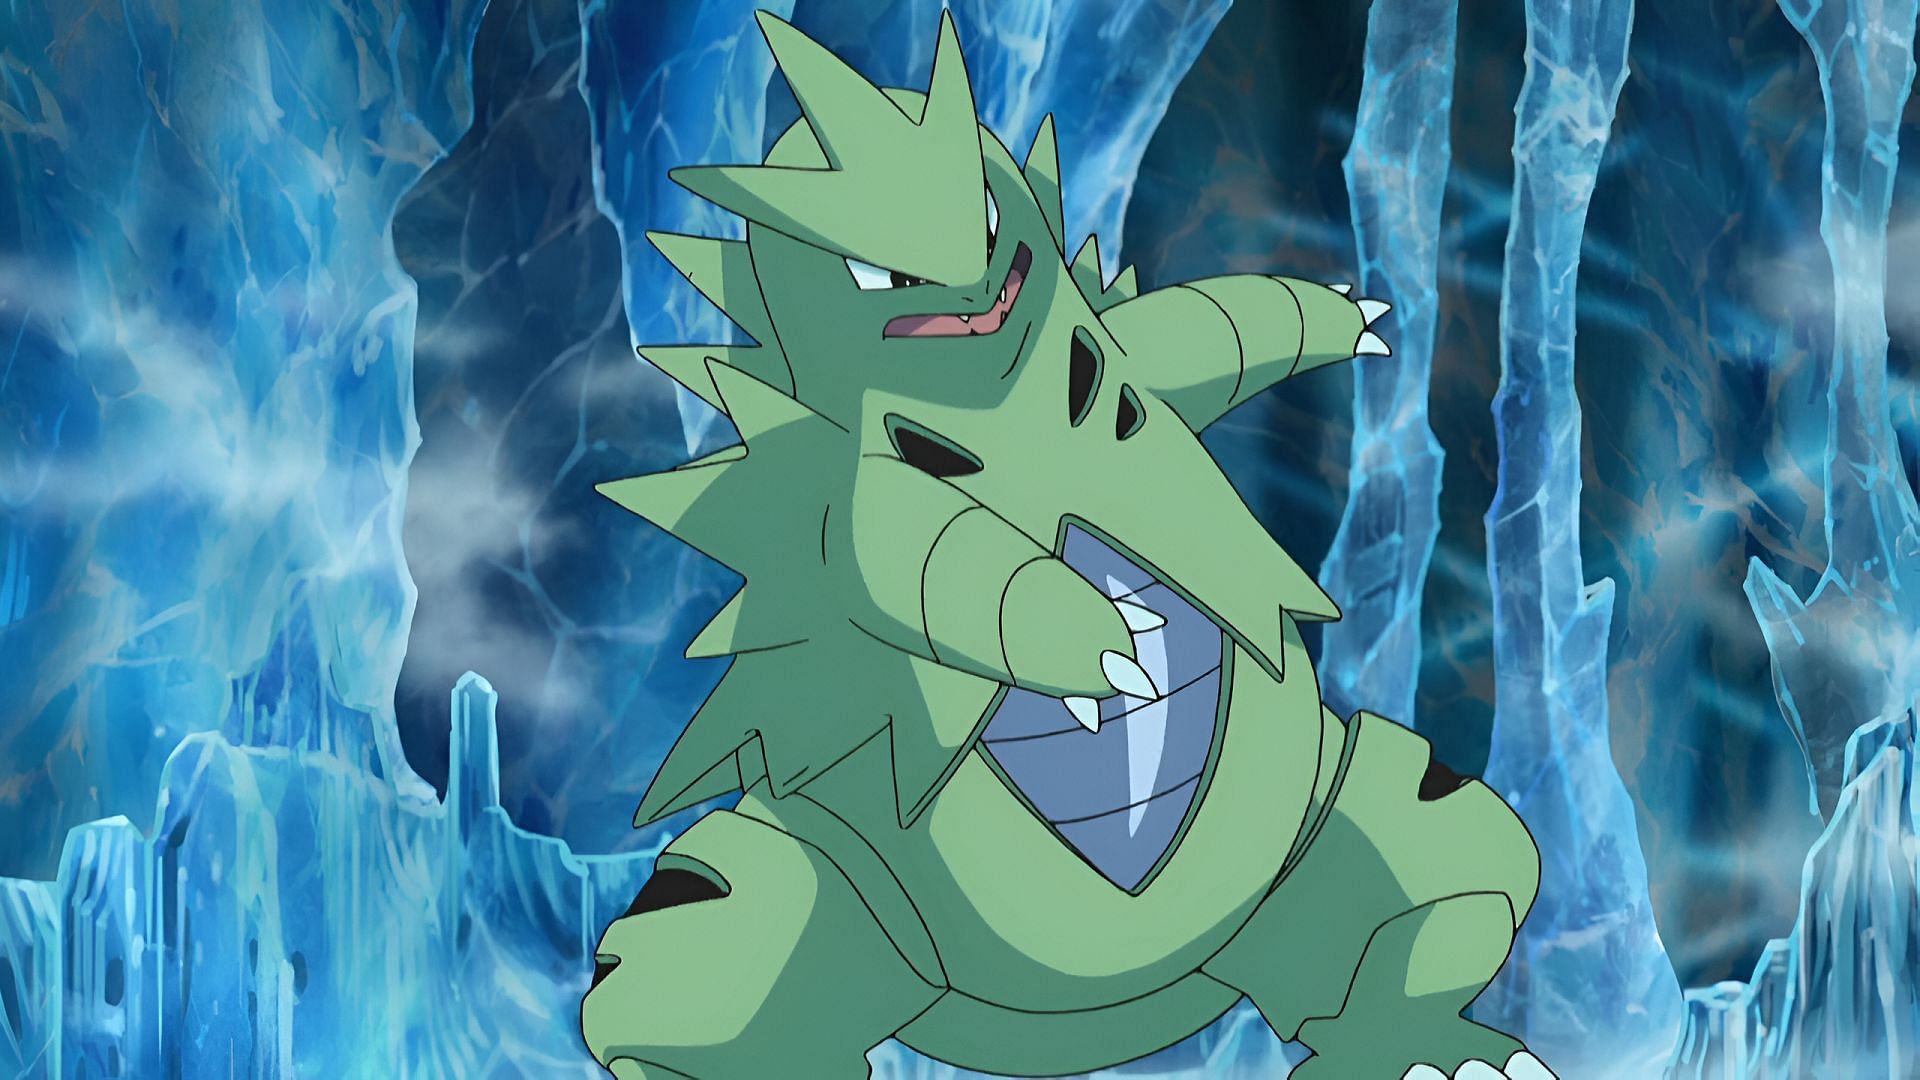 Tyranitar has immensely powerful stats for a non-legendary (Image via The Pokemon Company)